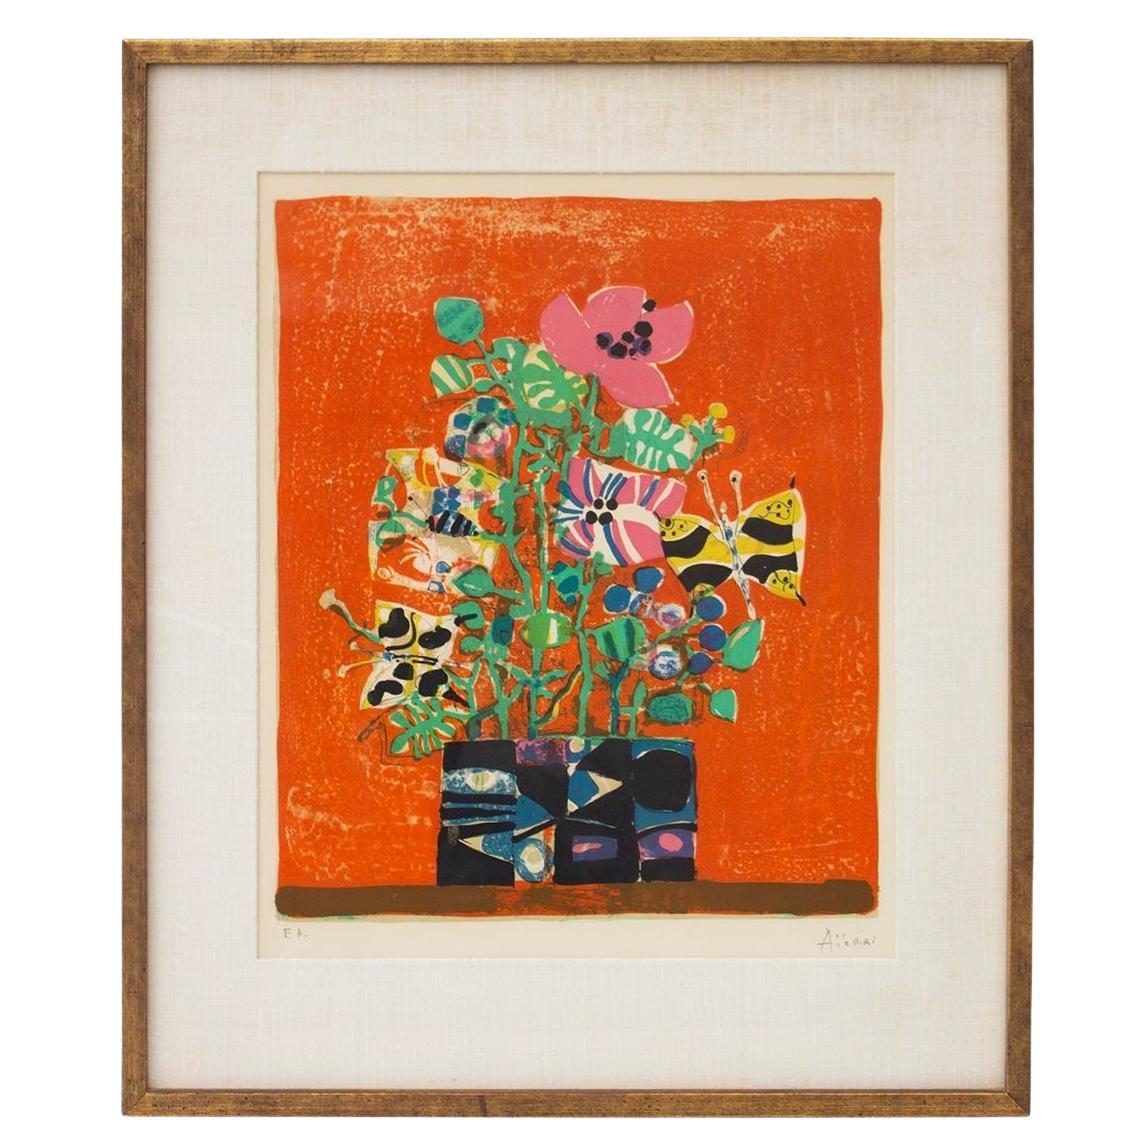 Paul Aizpiri Hand-Signed Original Color Lithograph in Orange with Gilt Frame and